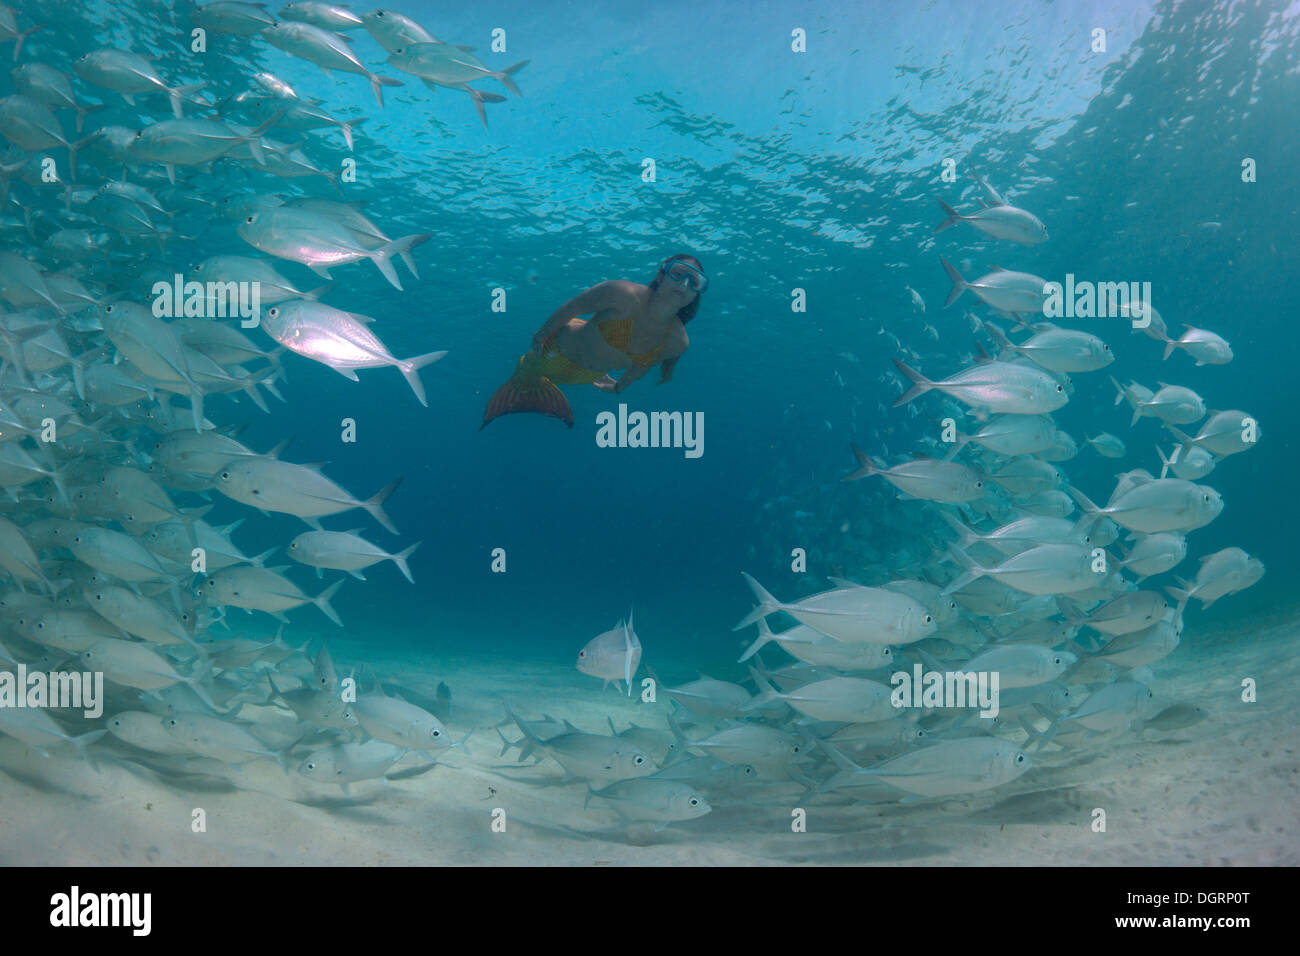 Women snorkling dressed as a mermaid in a school of Bigeye Trevally (Caranx sexfasciatus) in a lagoon, Philippines, Asia Stock Photo